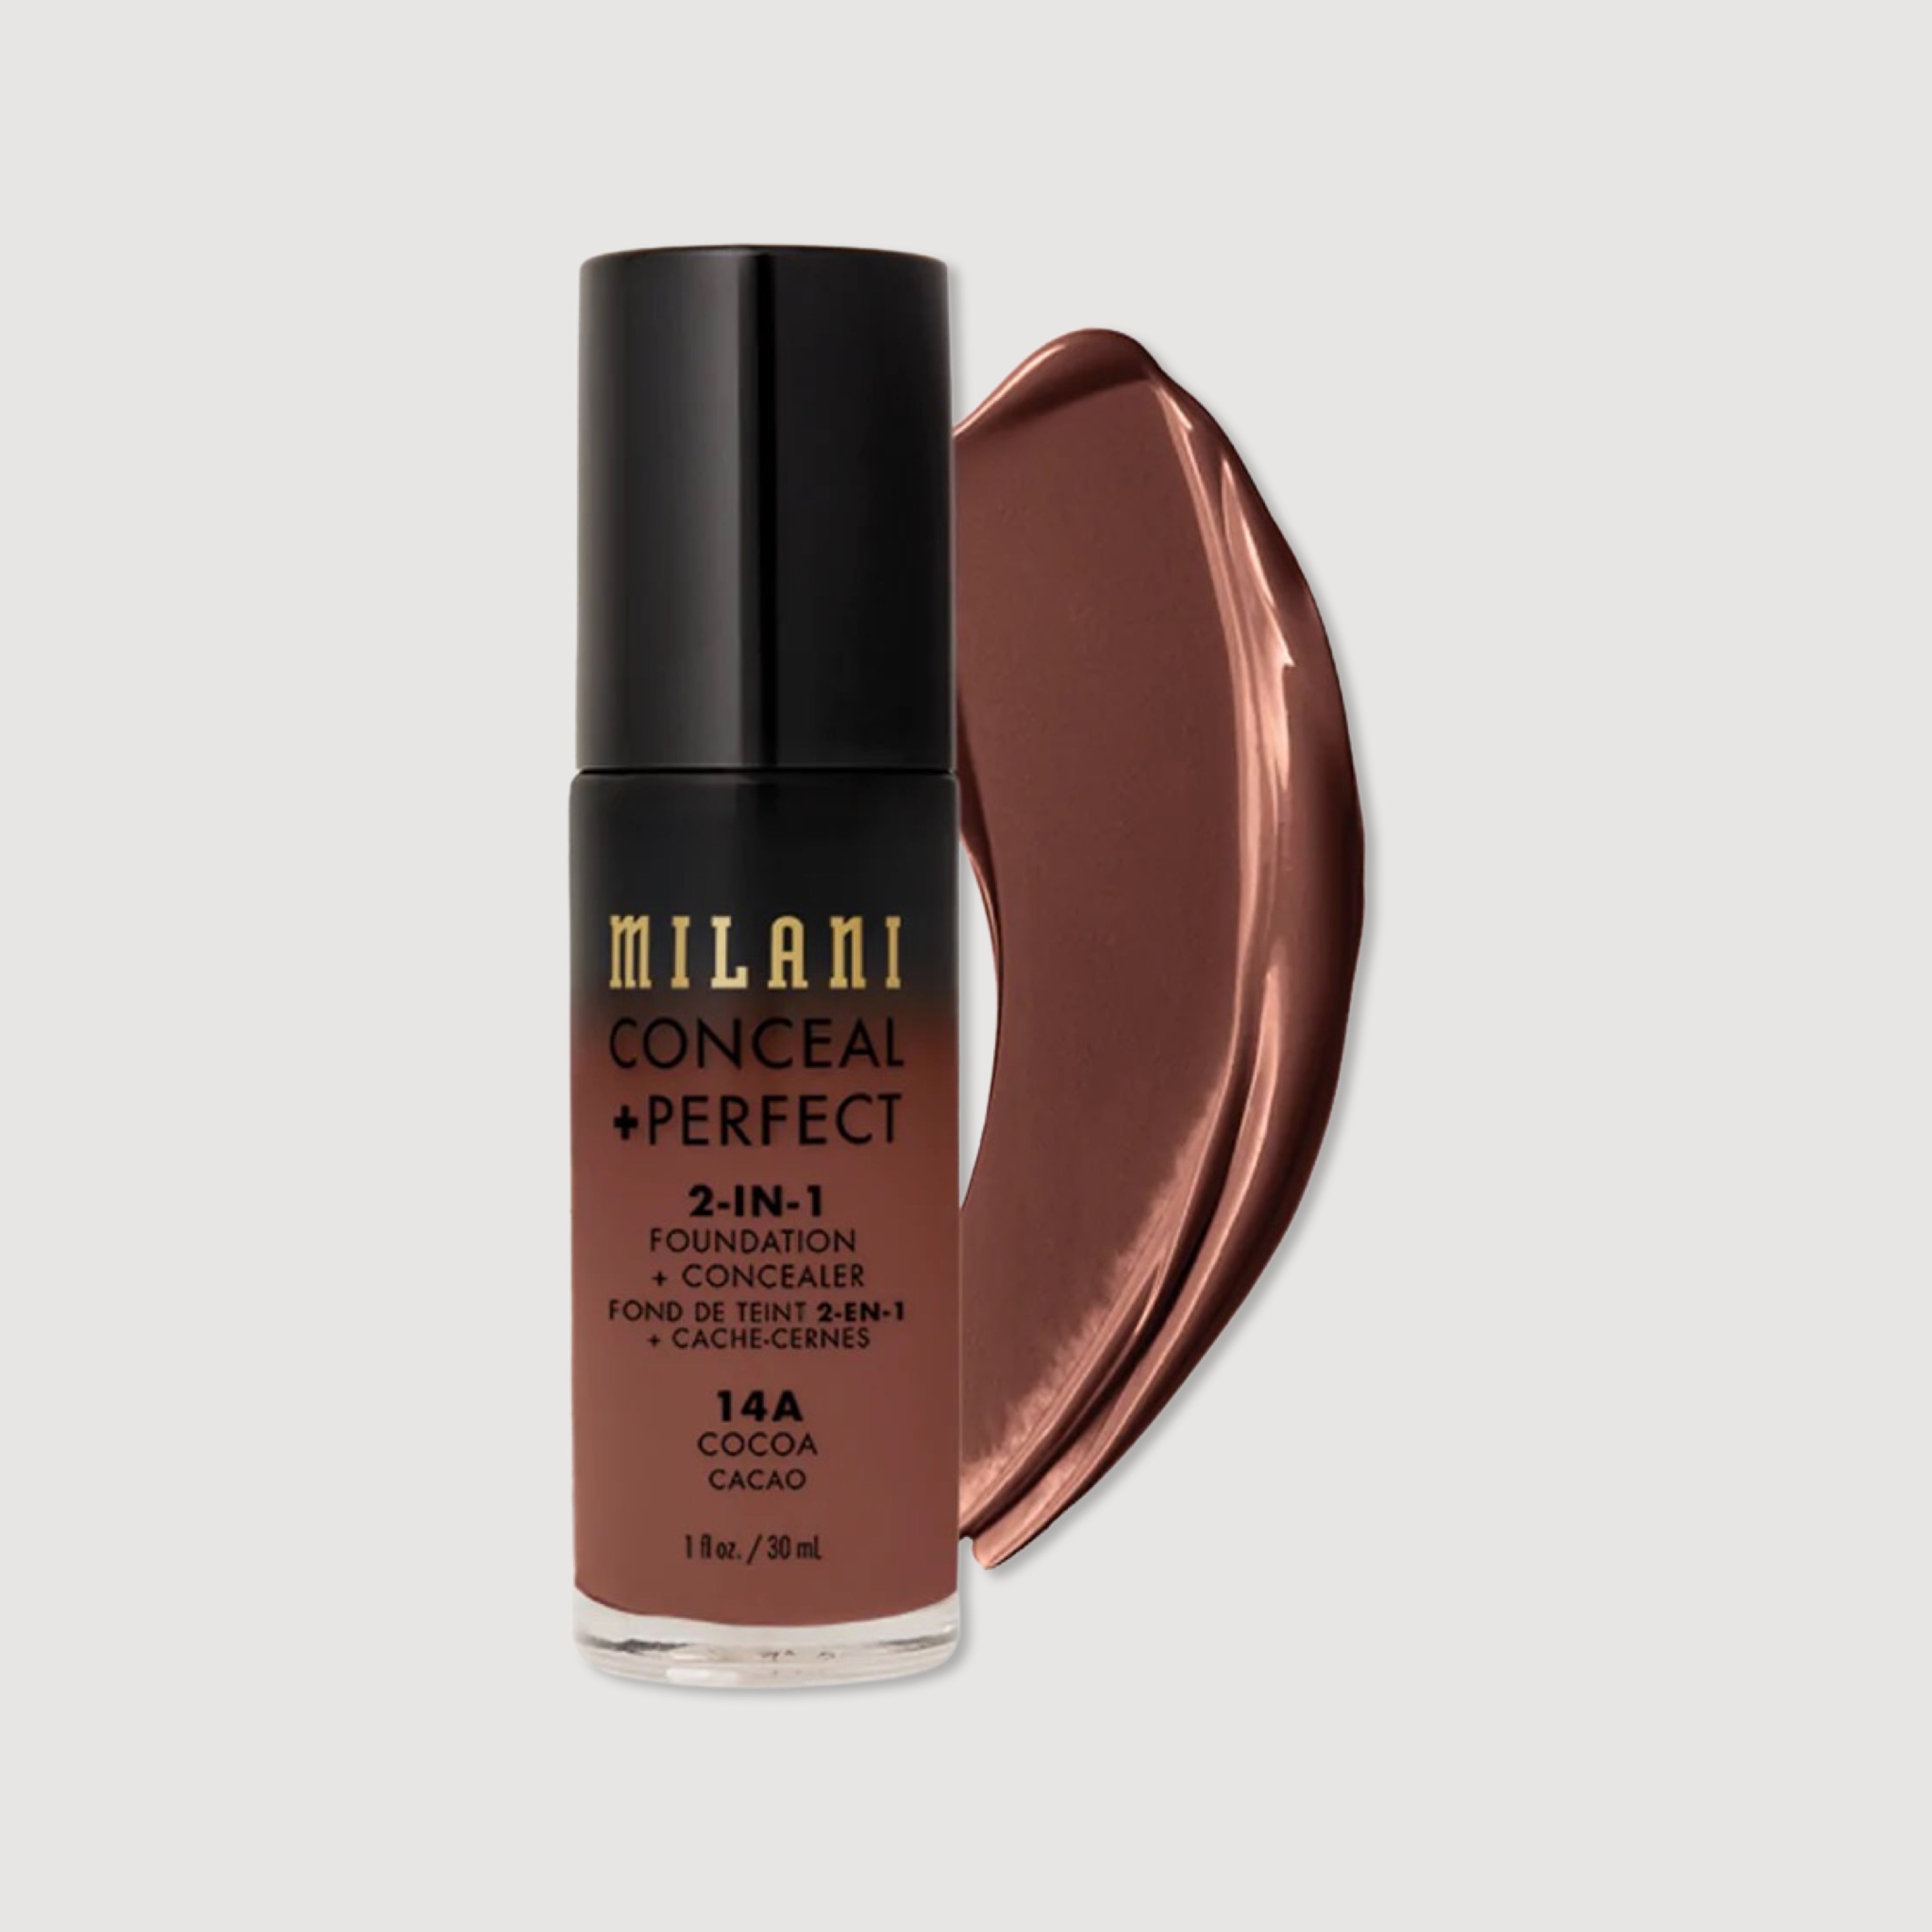 Milani Conceal + Perfect 2-IN-1 Foundation and Concealer